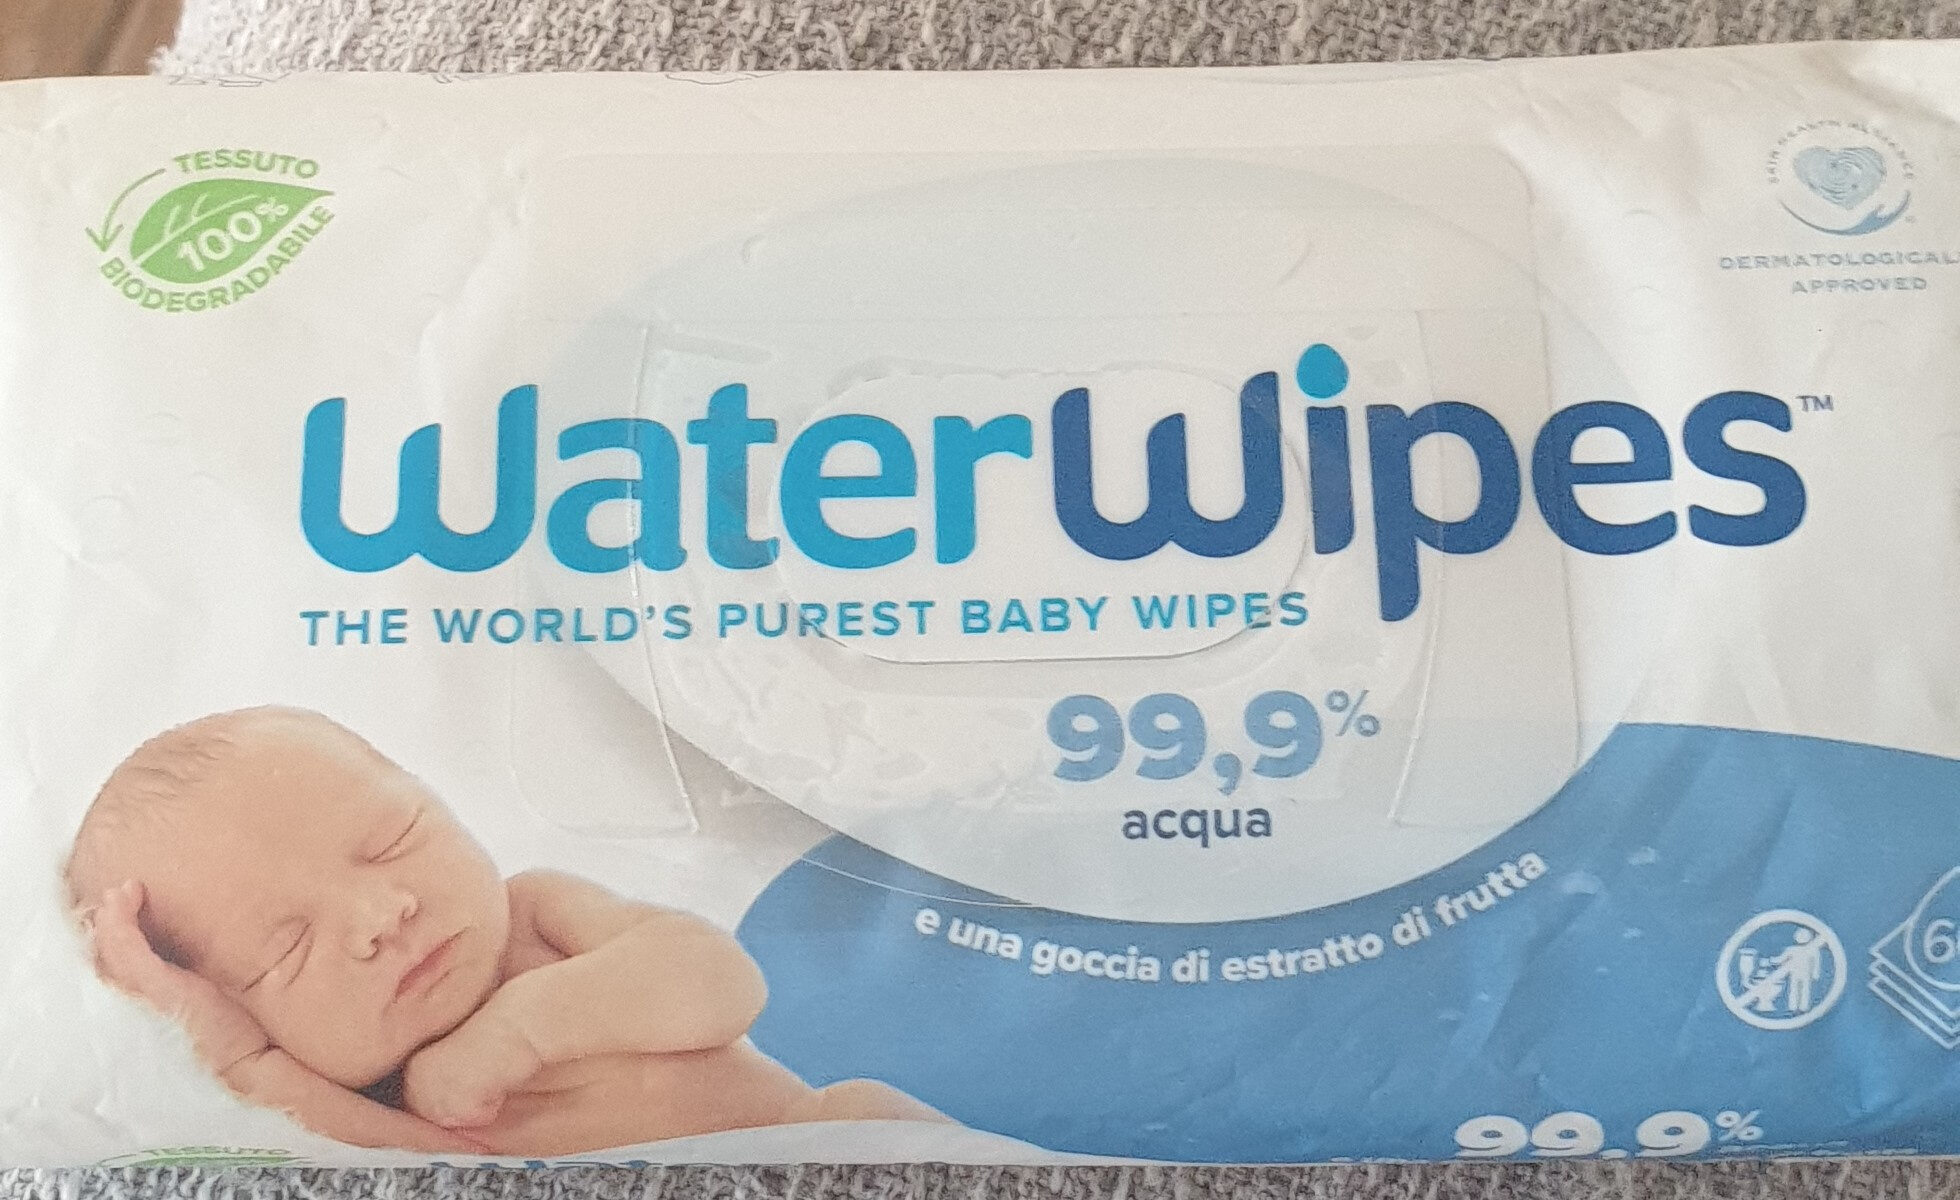 WaterWipes: products at